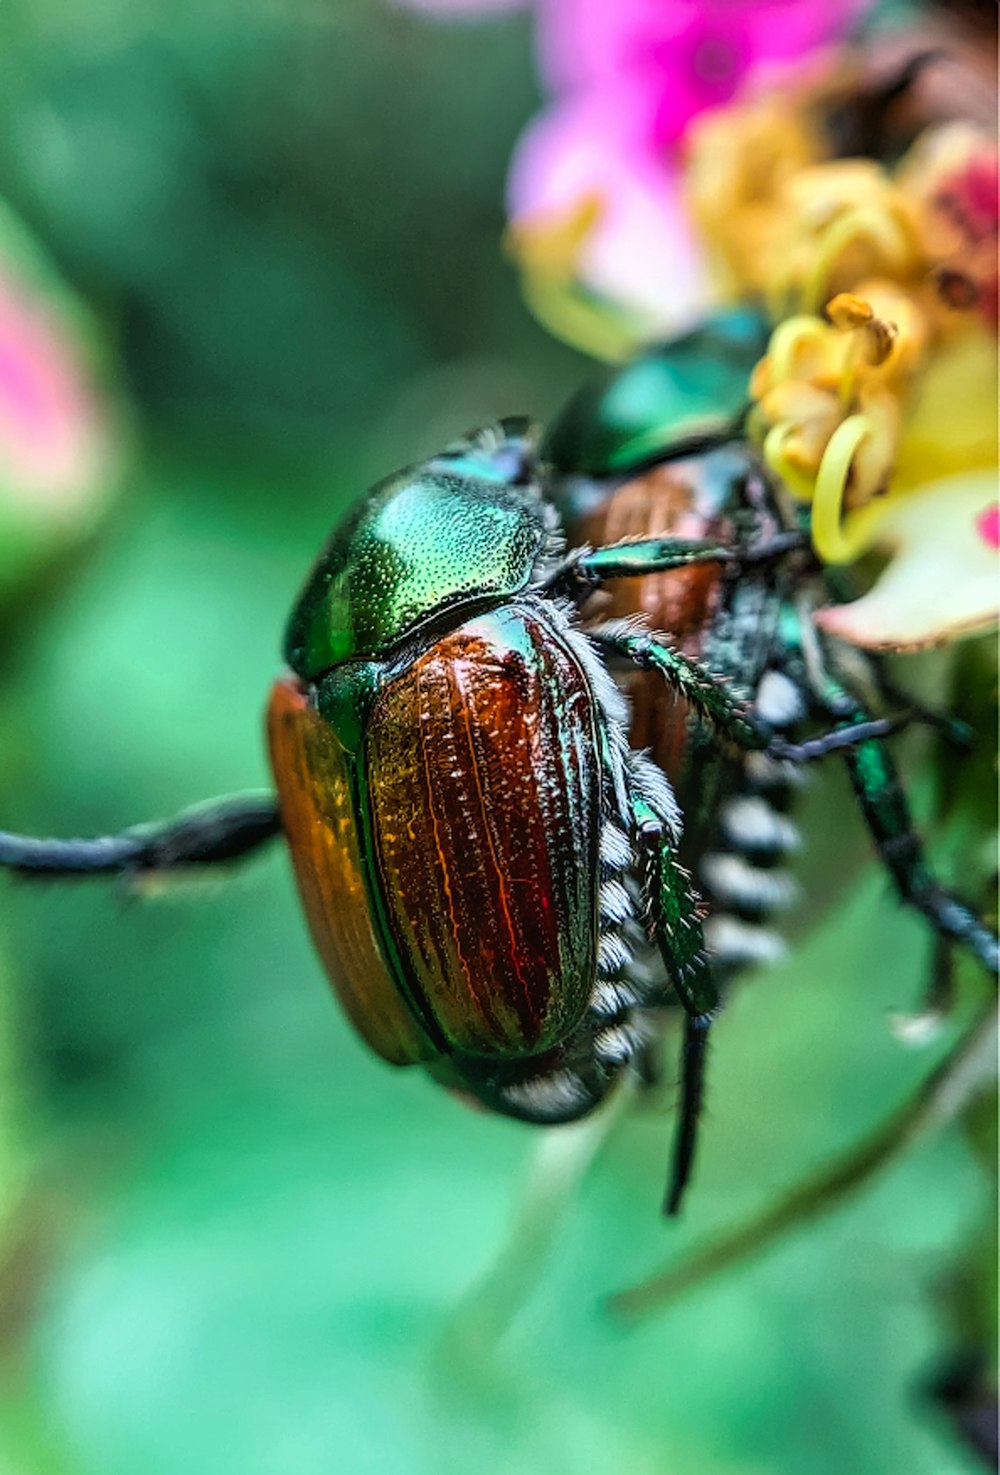 green and black beetle perched on yellow flower in close up photography during daytime